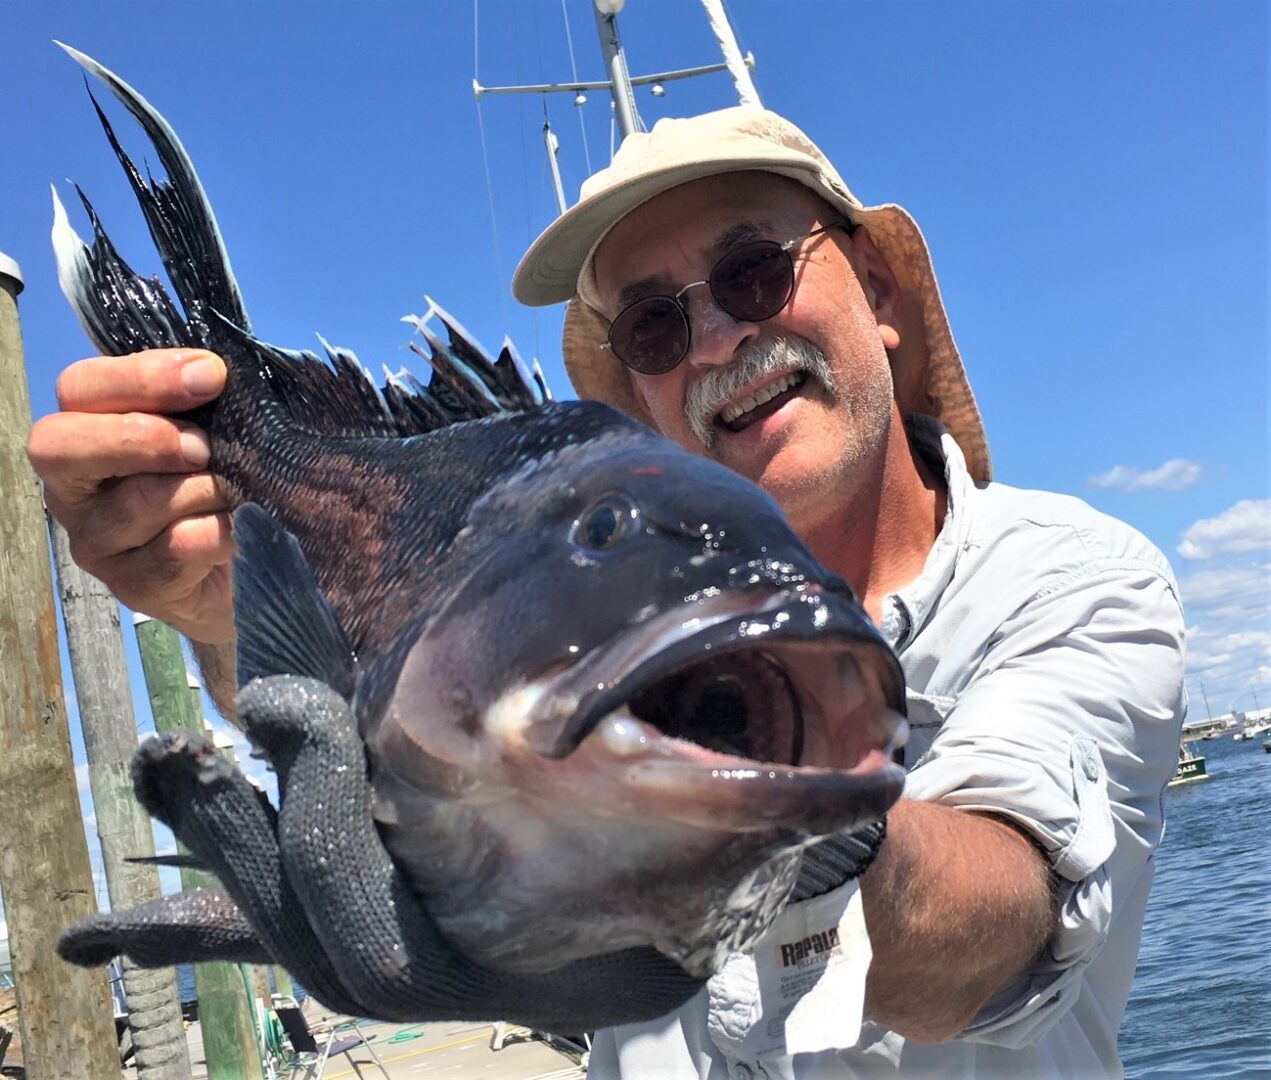 Fishing regulations for 2020 The Rhode Island Saltwater Anglers